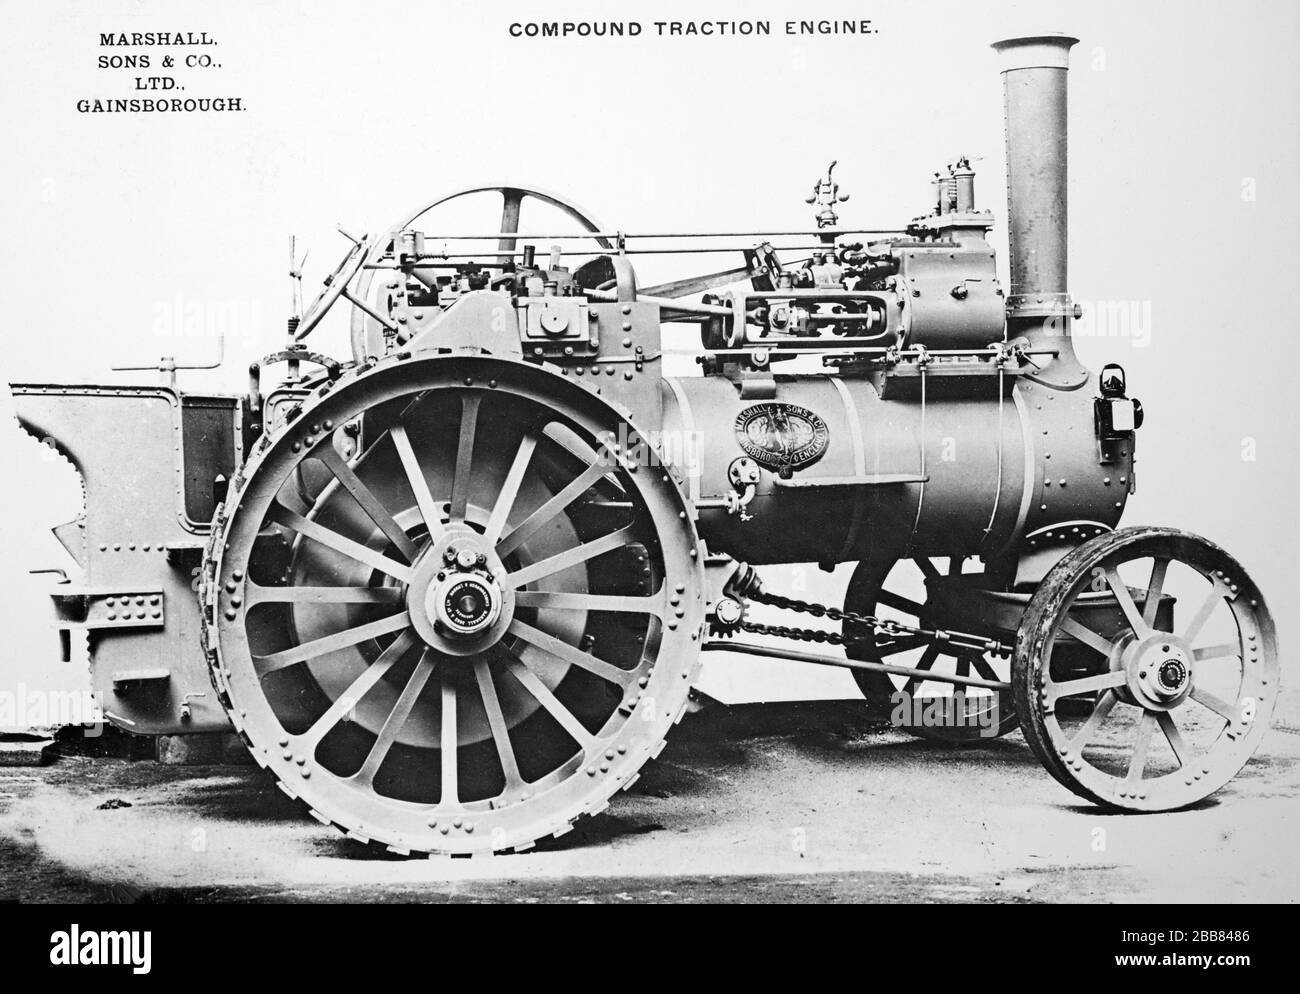 Vintage black and white photograph. Vintage Farm Machinery. A compound Traction engine produced by Marshall, sons and Co. of Gainsborough, England. Stock Photo